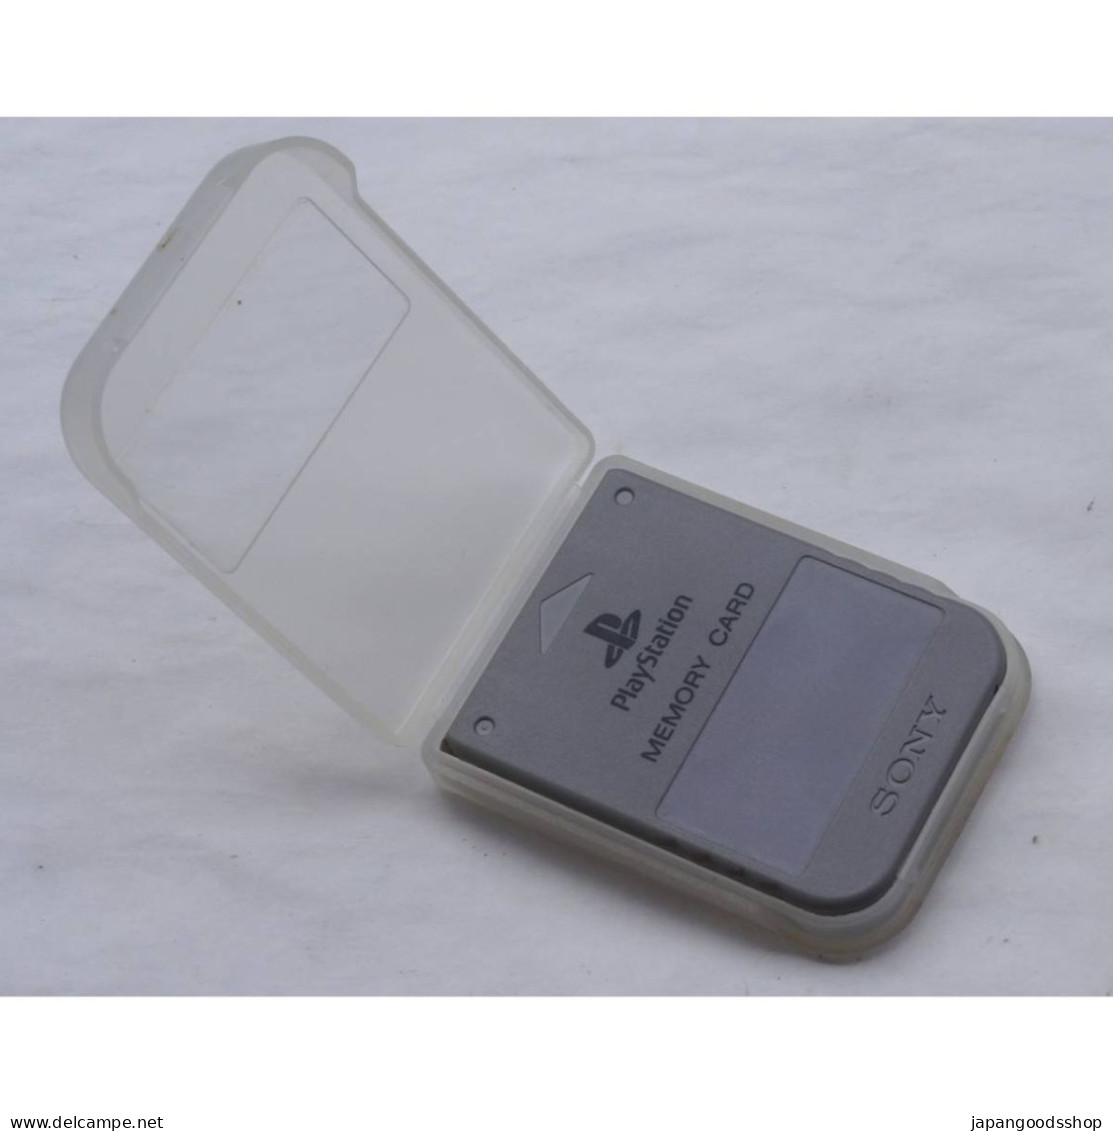 Playstation Memory Card - Accessories